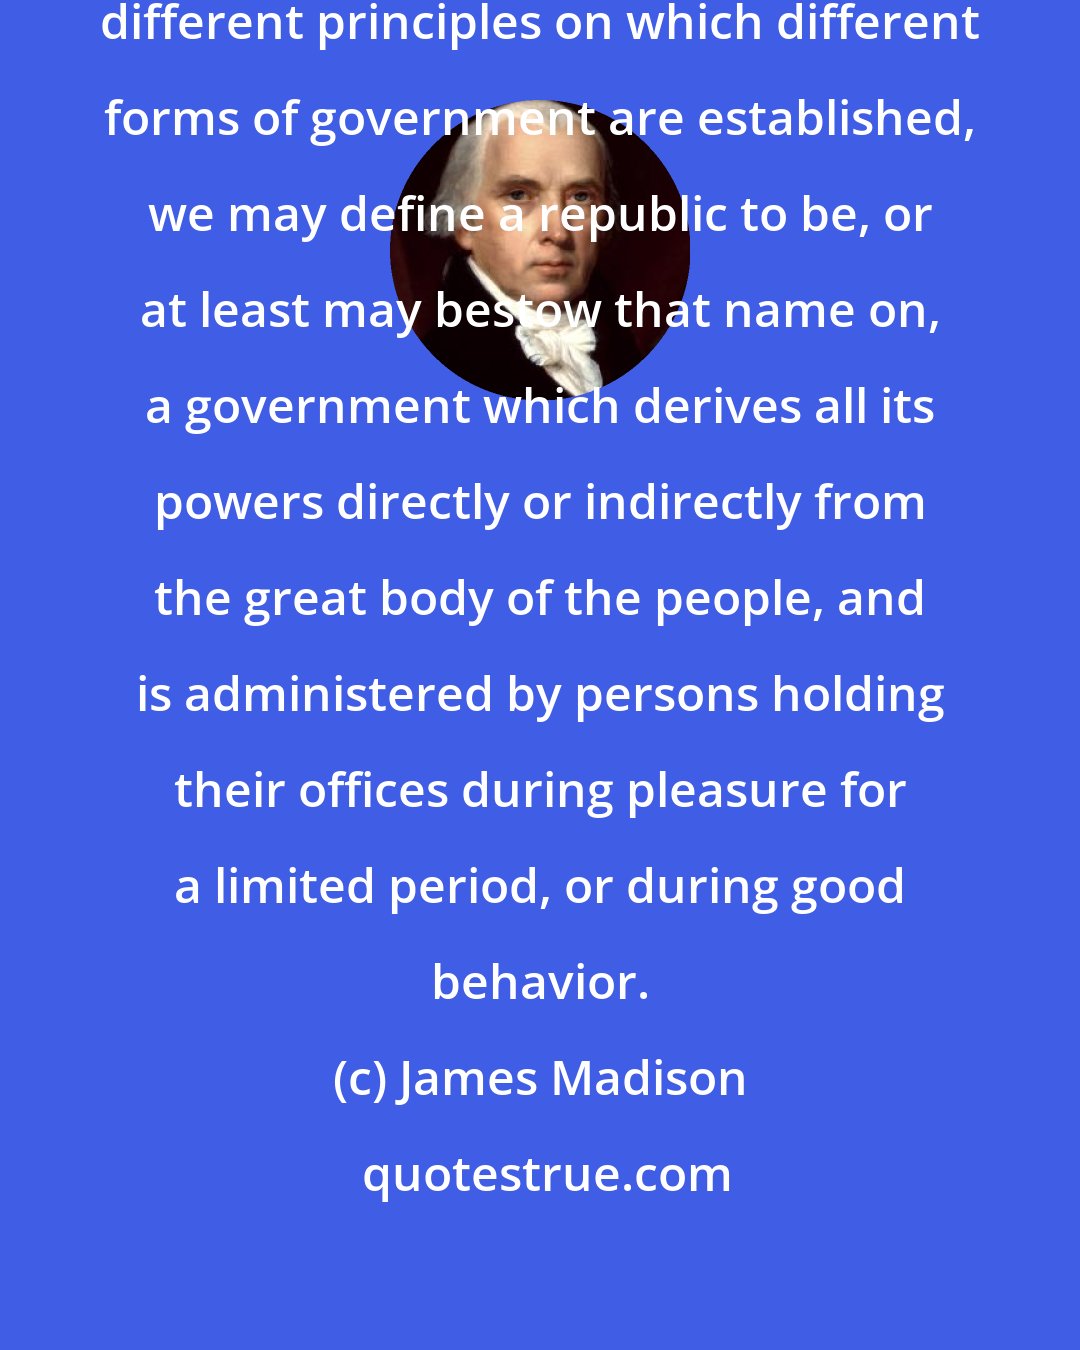 James Madison: If we resort for a criterion to the different principles on which different forms of government are established, we may define a republic to be, or at least may bestow that name on, a government which derives all its powers directly or indirectly from the great body of the people, and is administered by persons holding their offices during pleasure for a limited period, or during good behavior.